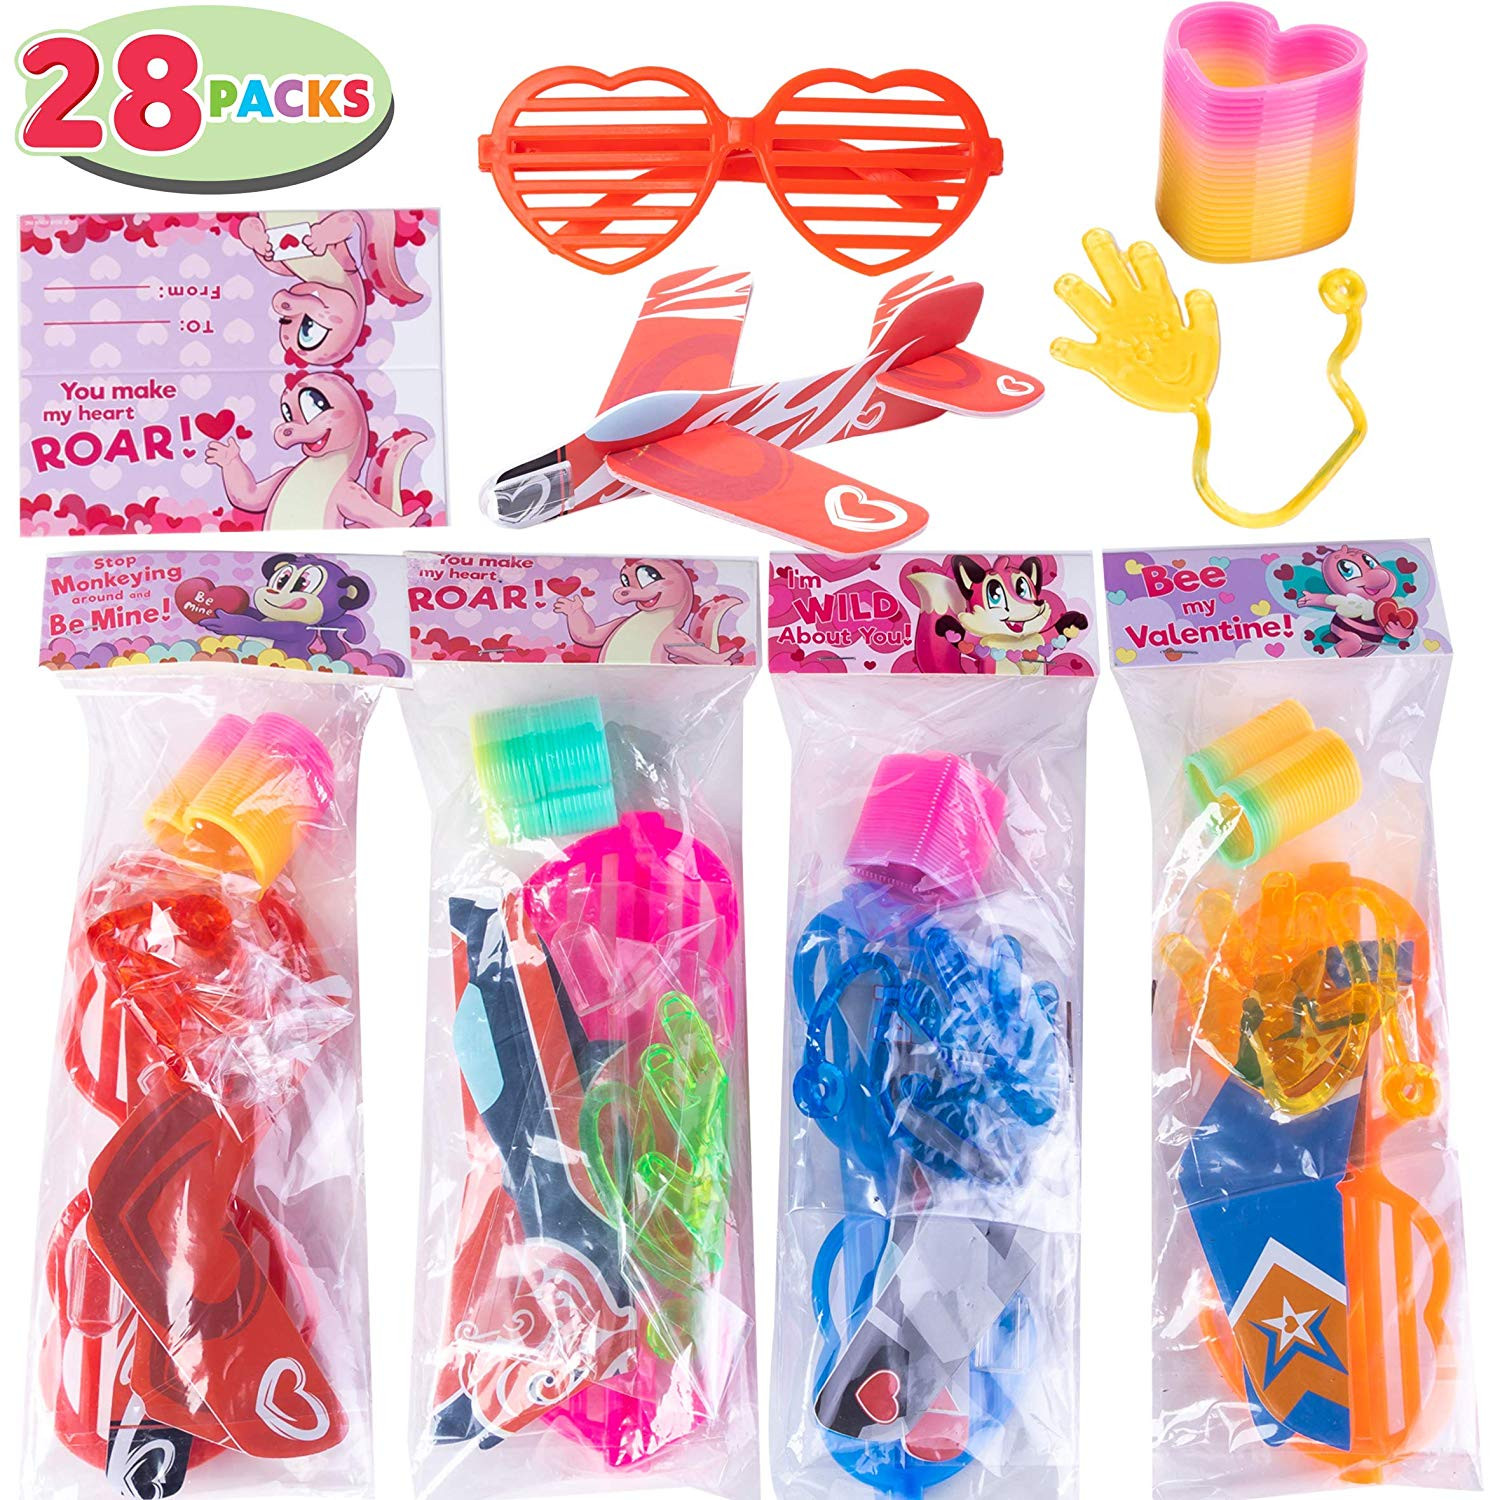 Valentine'S Day Gift Ideas For Kids
 Valentines Day Classroom Gifts 28 Pack Kids Valentines